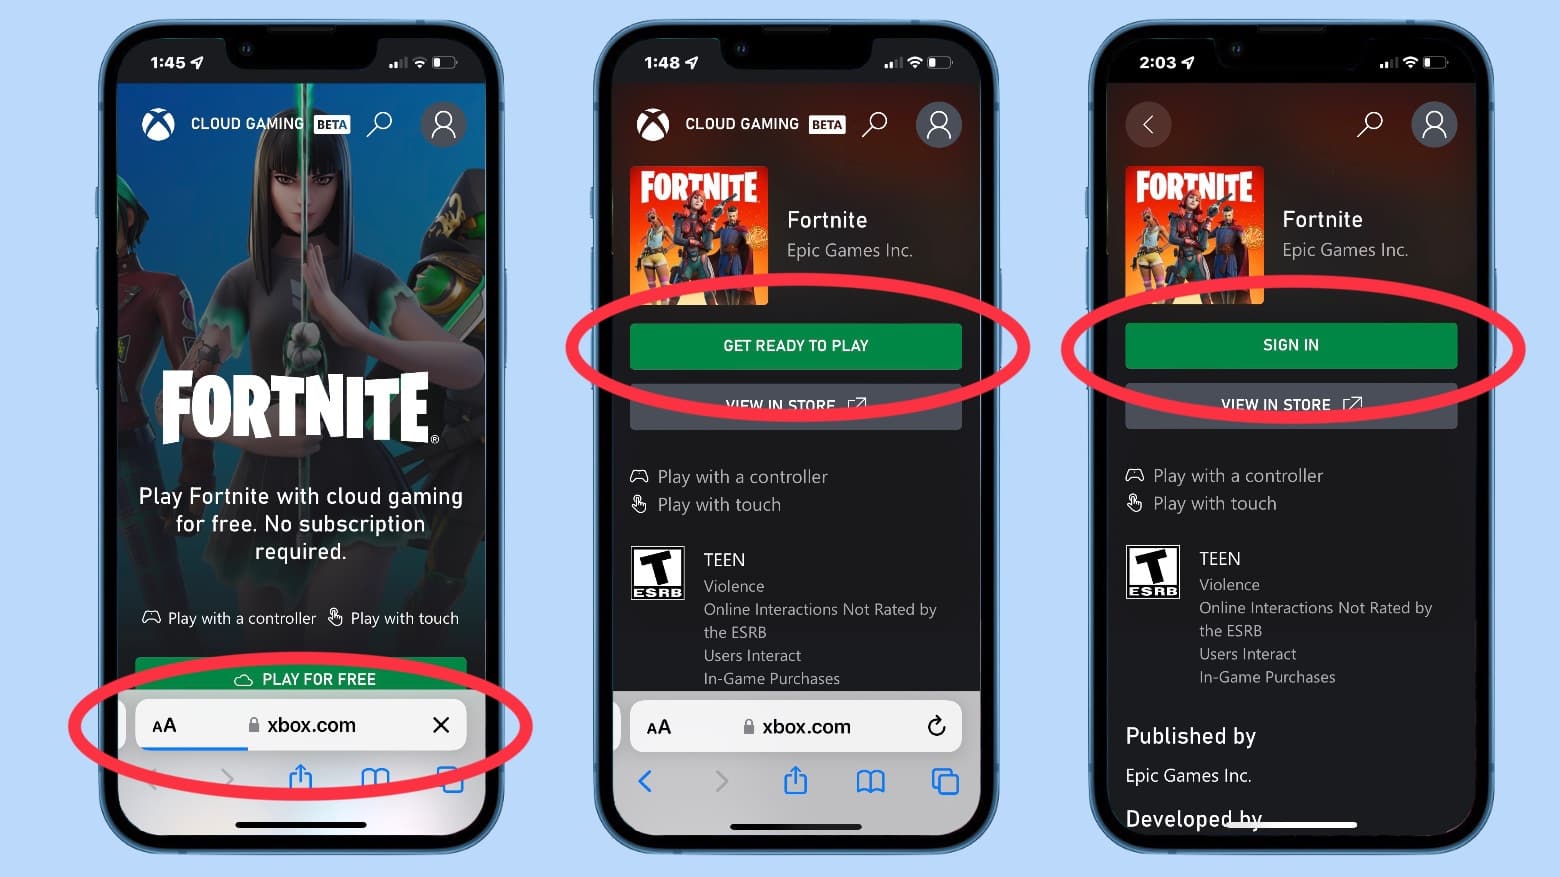 How to Play Fortnite on Android and iOS